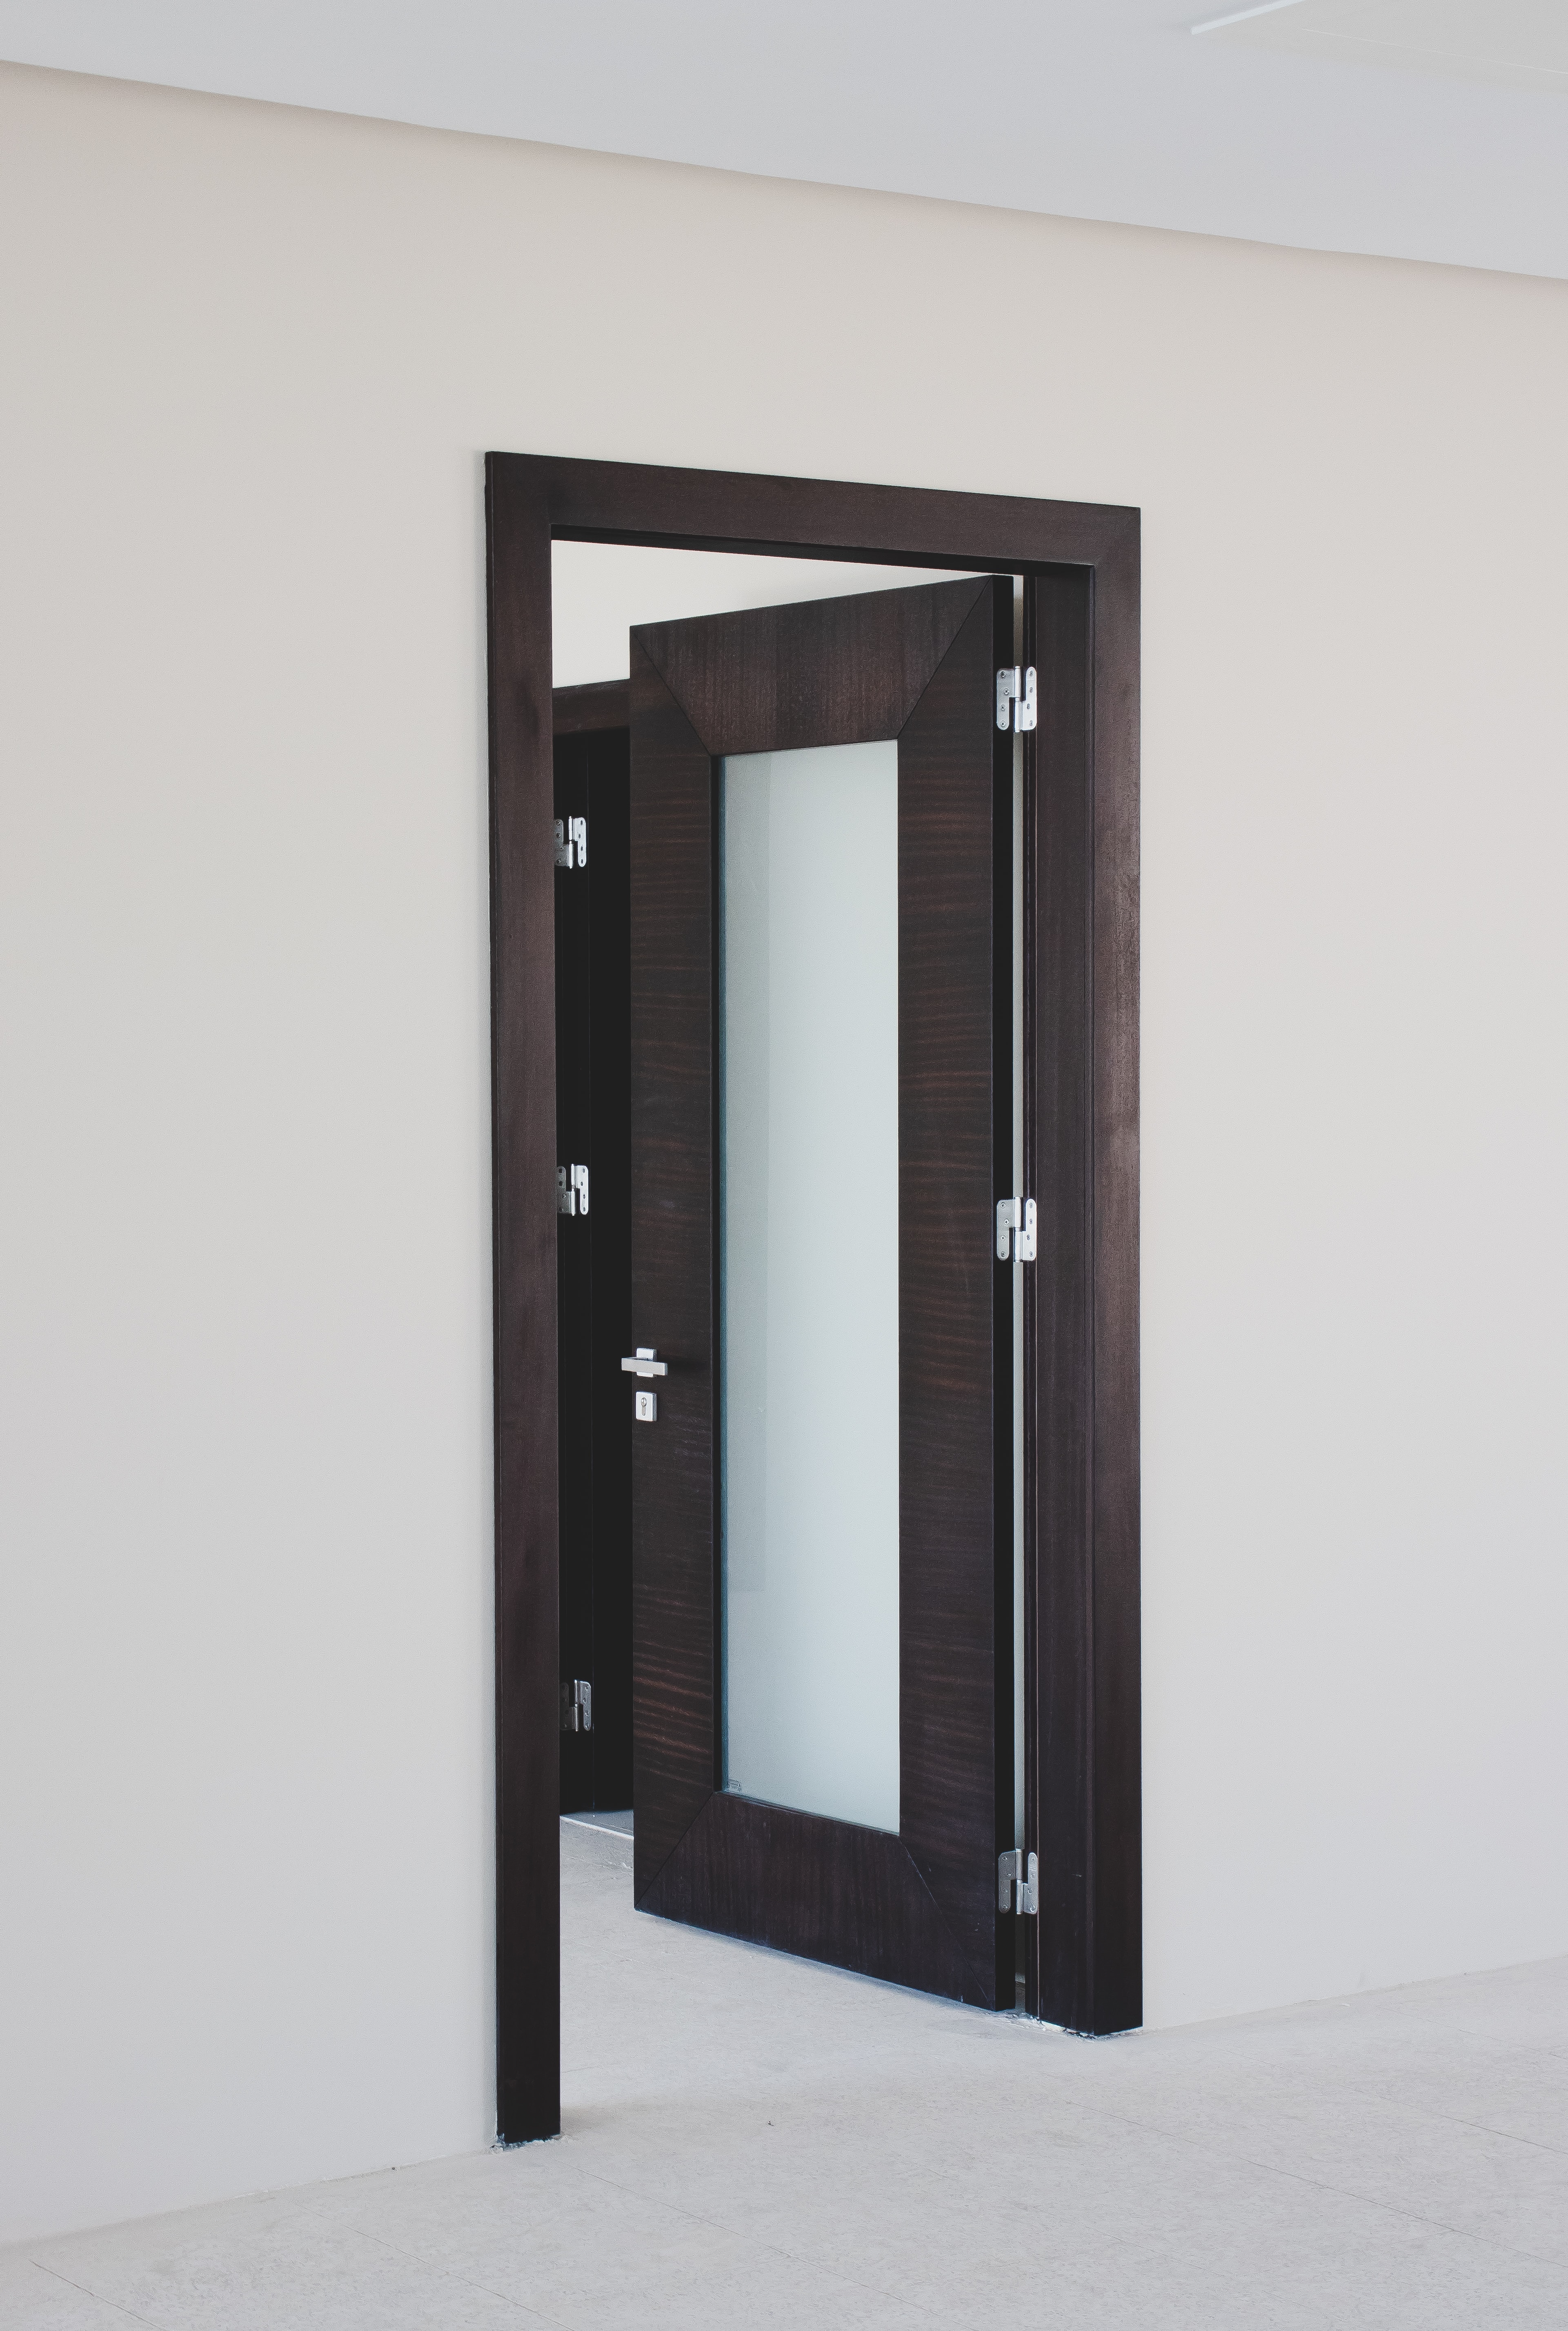 A close-up of an elegant Inswing door swinging inside the room.